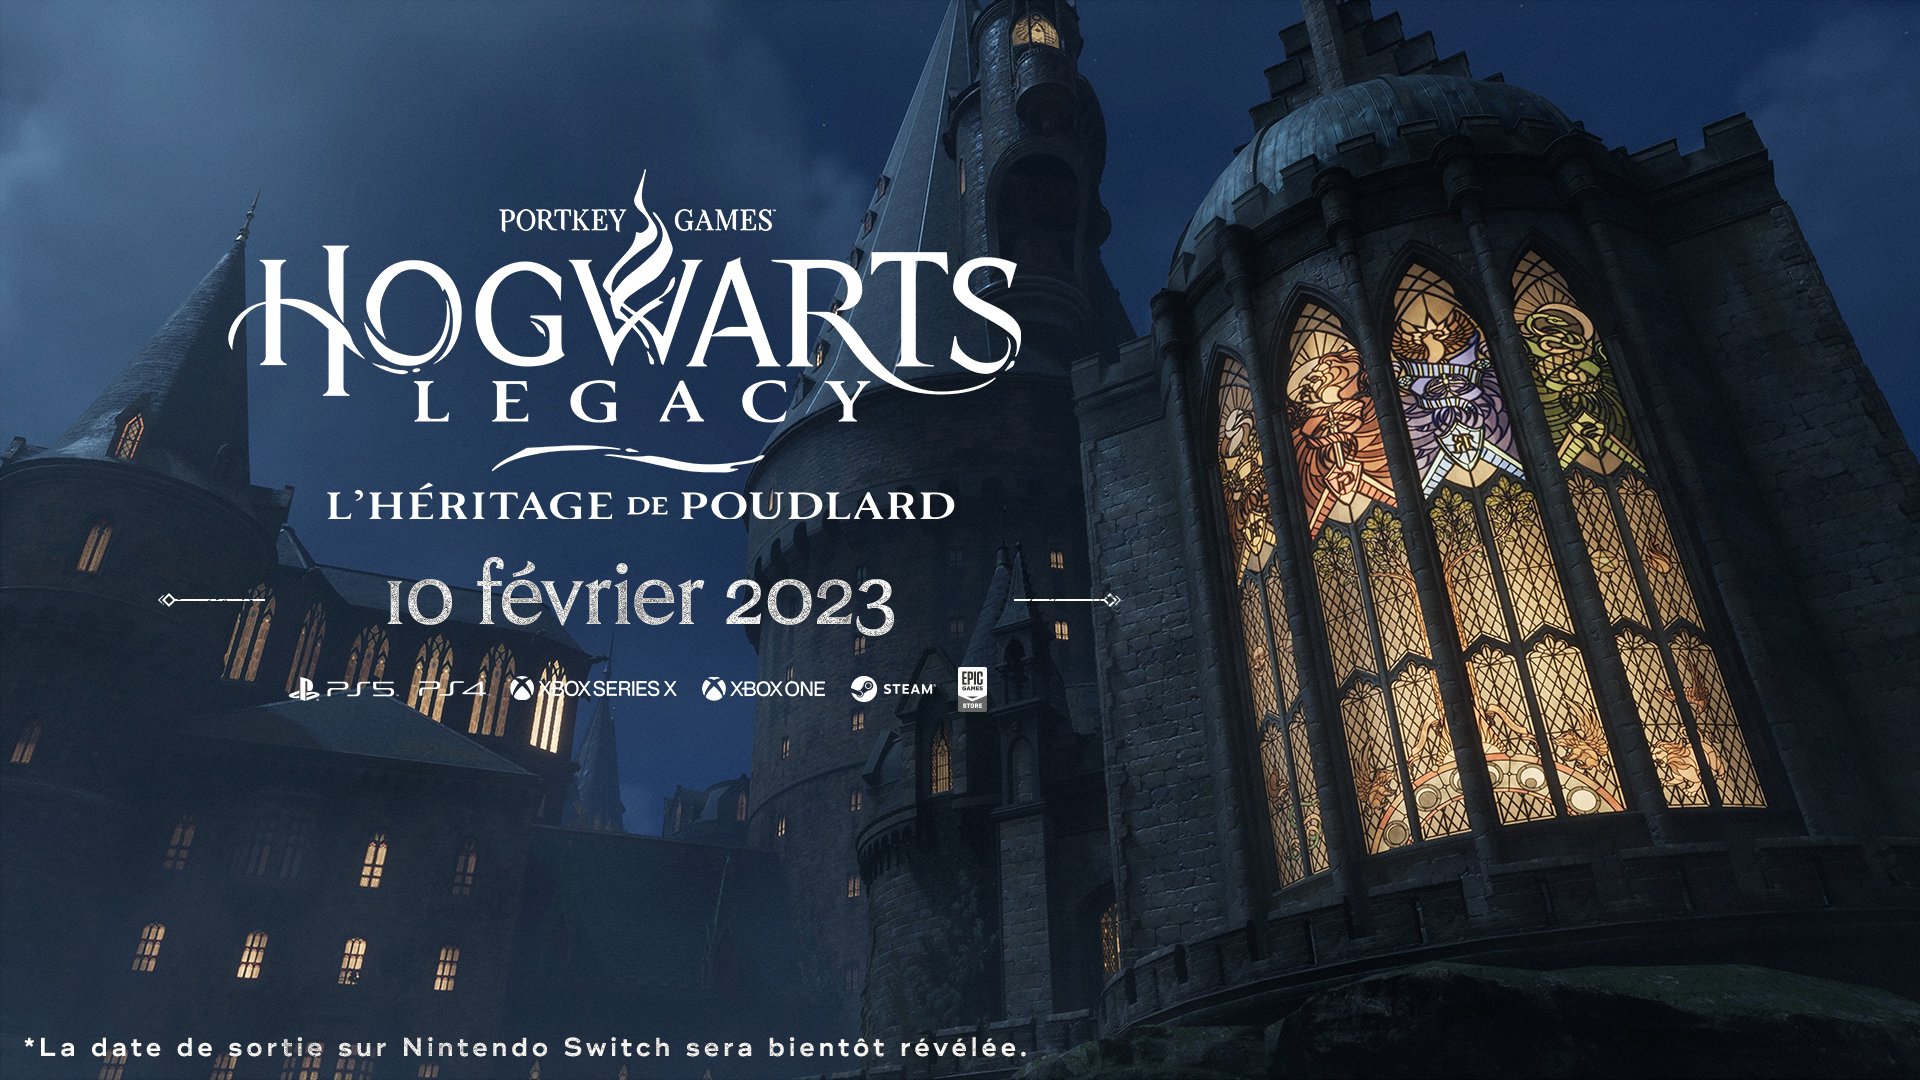 Experience the Magic of Hogwarts Legacy with These Hot Screenshots on Nintendo Switch - Let Your Imagination Take Flight!